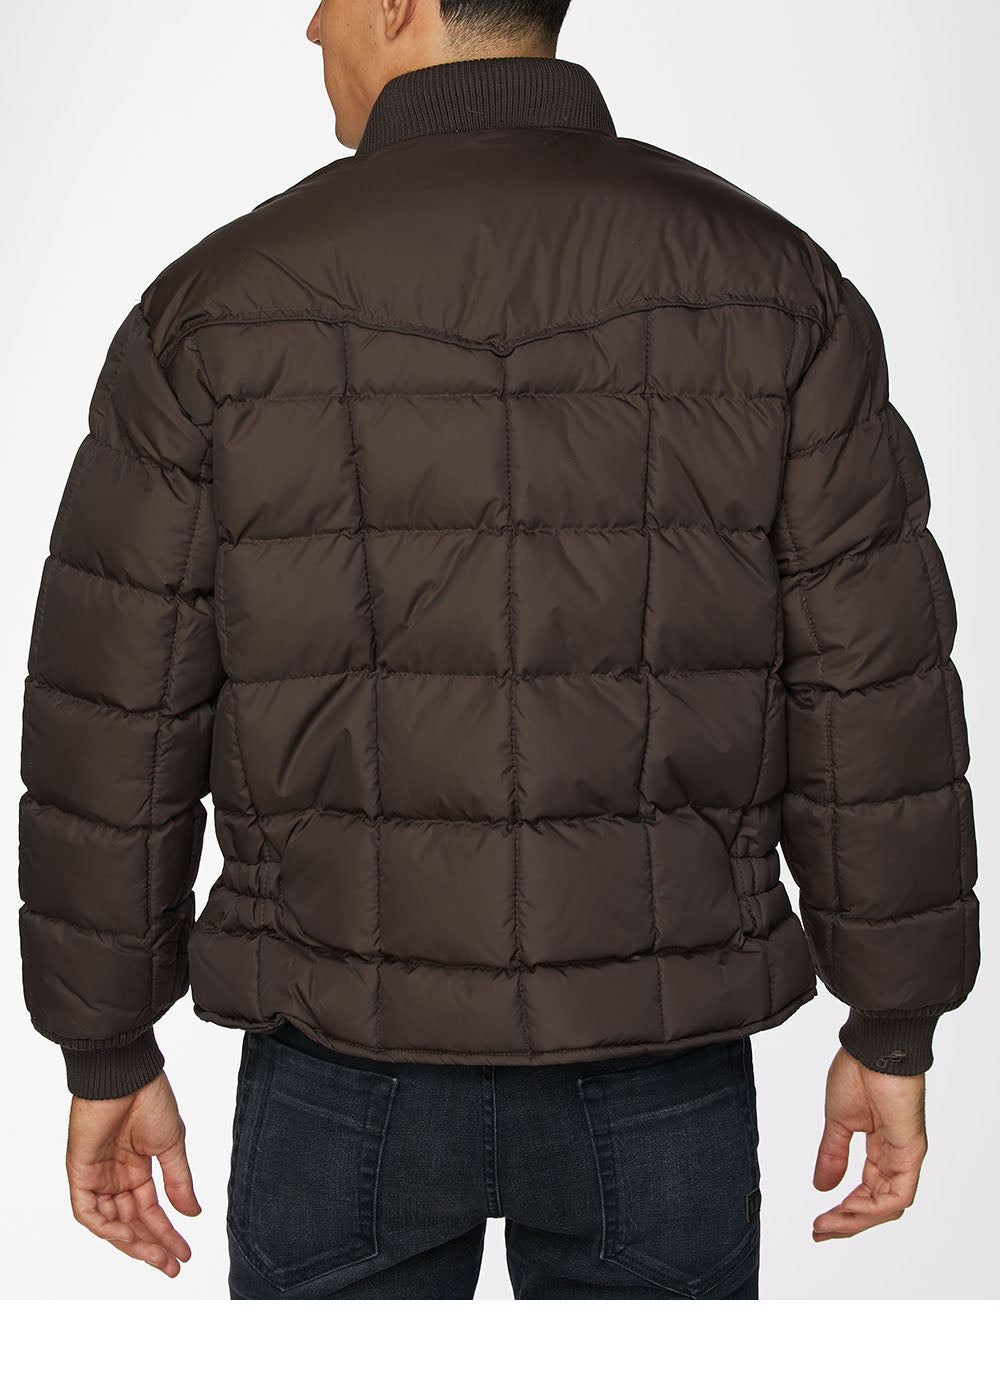 Men's Nylon Quilted Puffer Jacket -NJ629-Brown